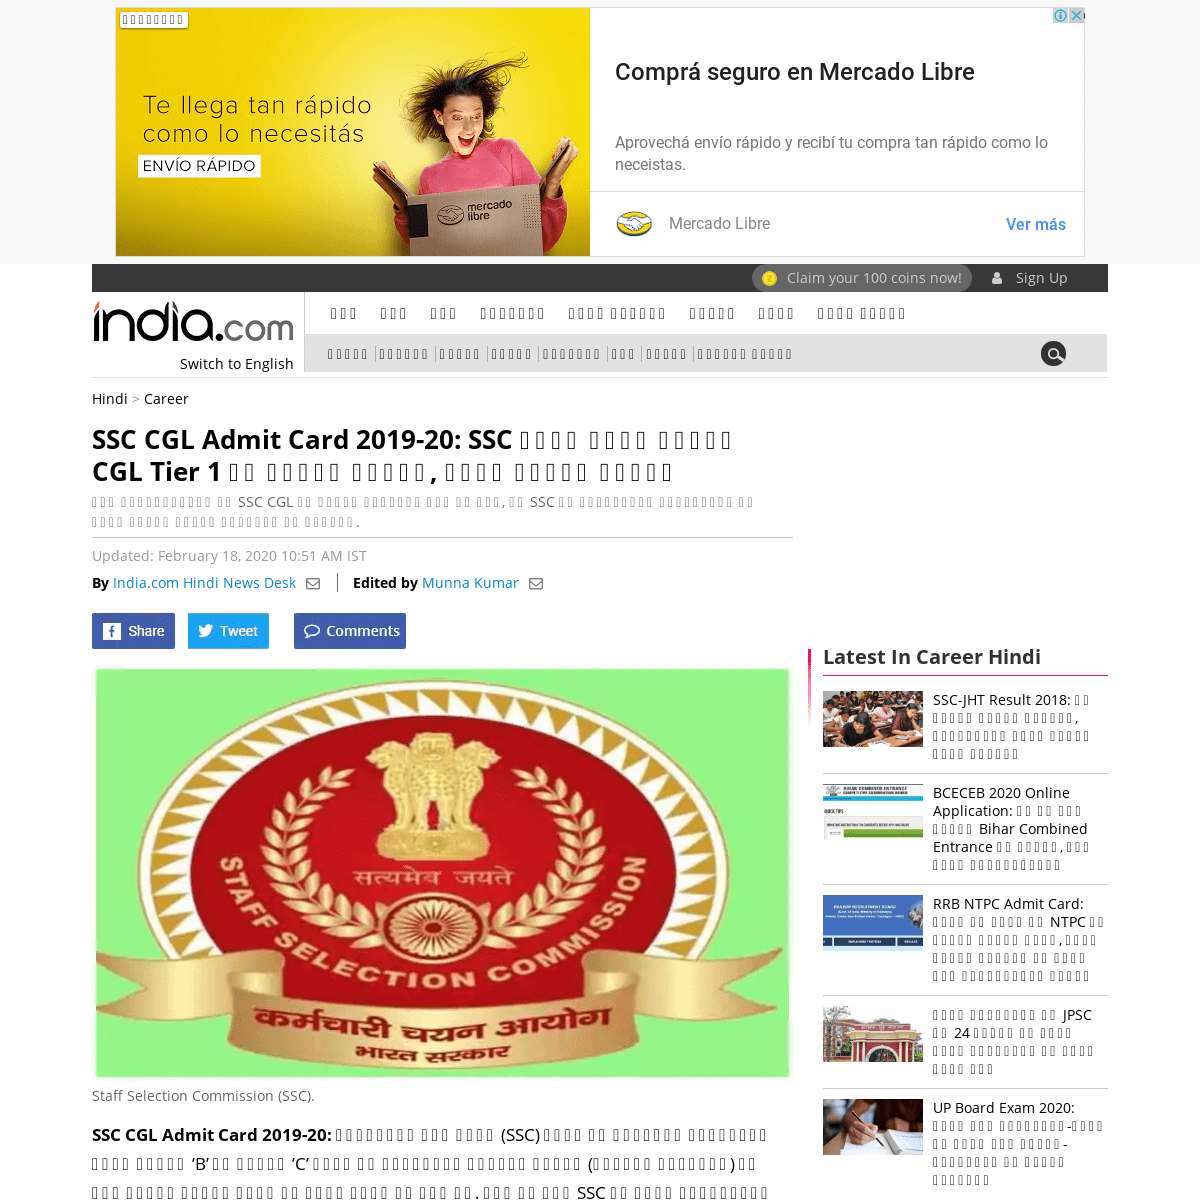 A complete backup of www.india.com/hindi-news/career-hindi/ssc-cgl-admit-card-2019-20-ssc-will-soon-release-cgl-tier-1-admit-car